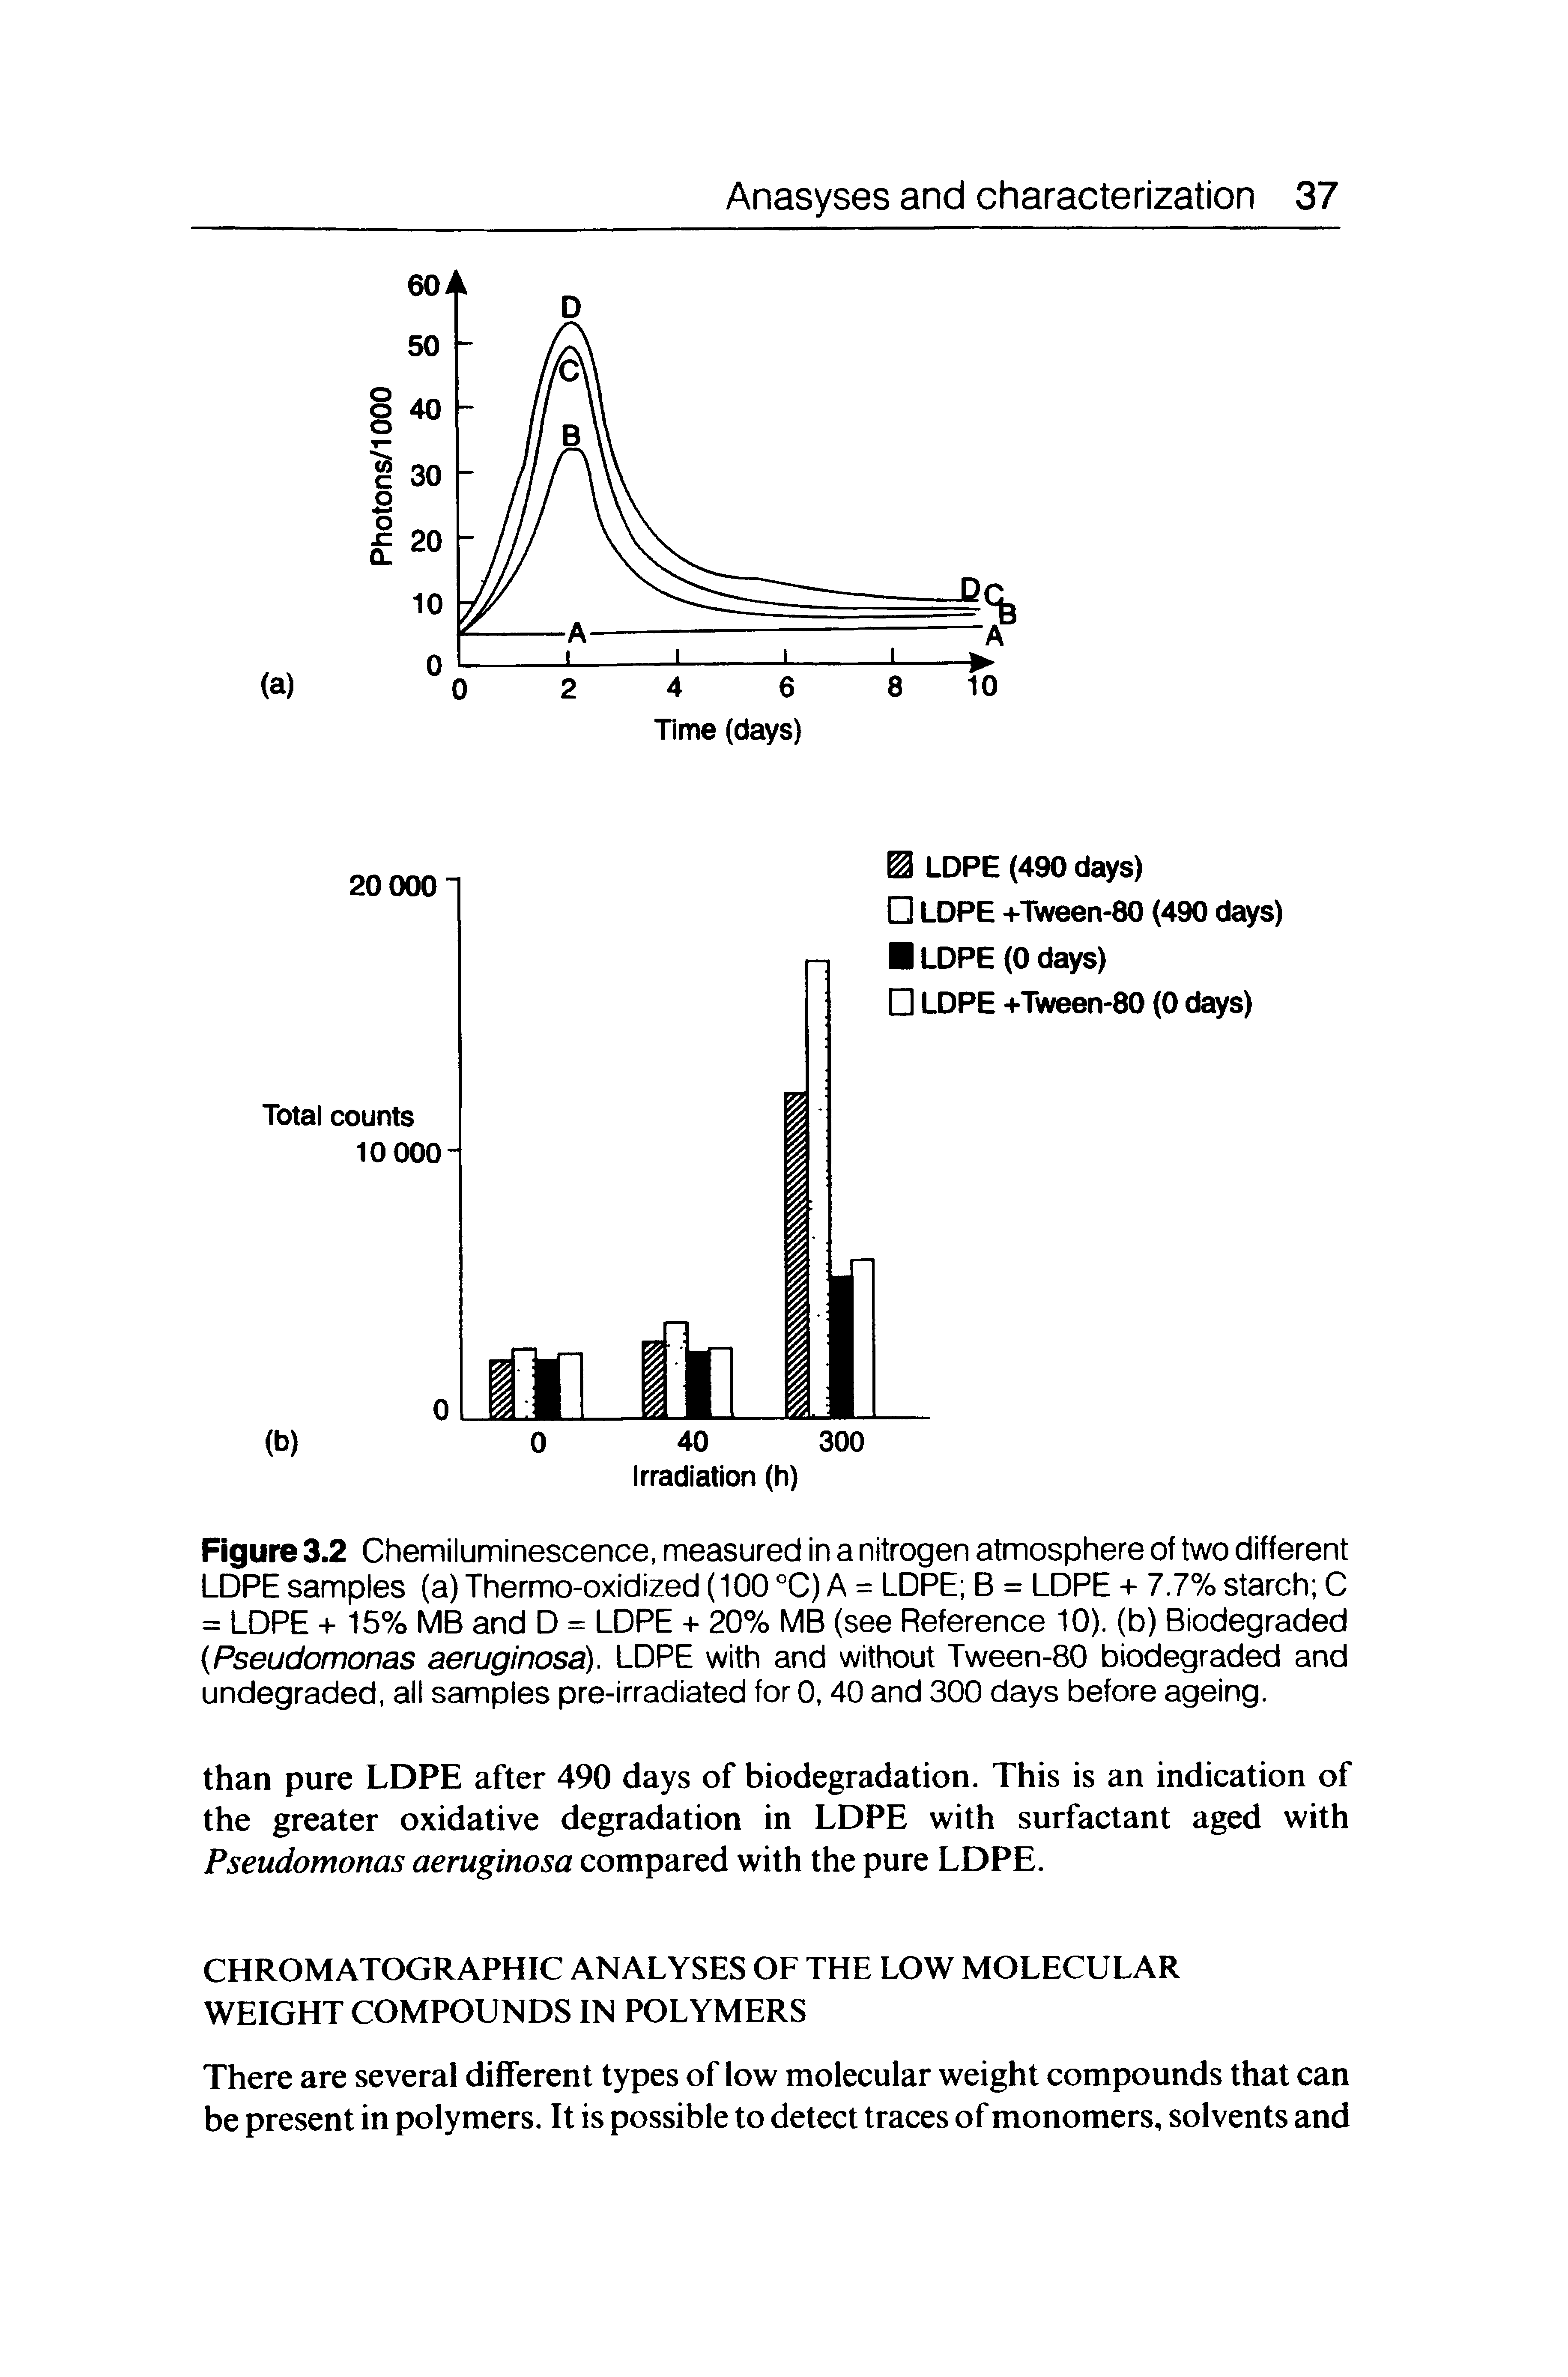 Figure 3.2 Chemiluminescence, measured in a nitrogen atmosphere of two different LDPE samples (a)Thermo-oxidlzed(100°C) A = LDPE B = LDPE + 7.7% starch C = LDPE + 15% MB and D = LDPE + 20% MB (see Reference 10). (b) Biodegraded (Pseudomonas aeruginosa). LDPE with and without Tween-80 biodegraded and undegraded, all samples pre-irradiated for 0,40 and 300 days before ageing.